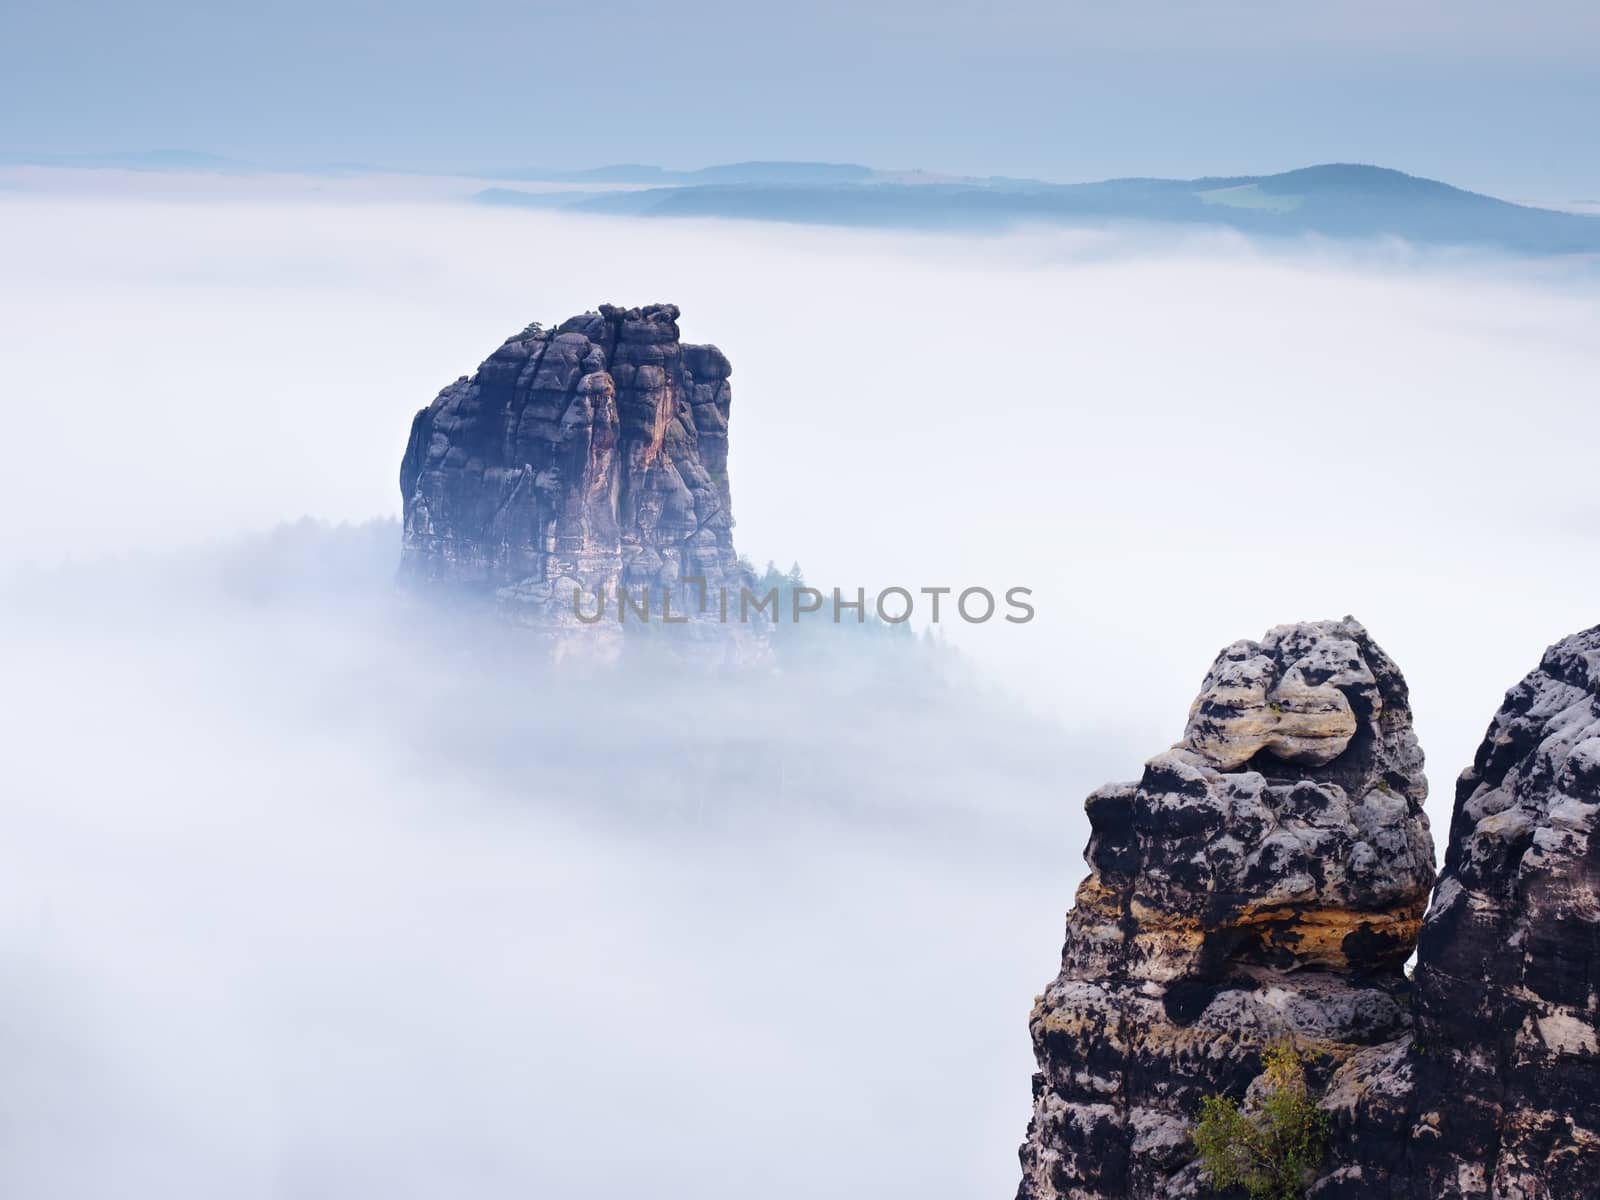 Sharp sandstone rock empire sticking out from heavy fog. Deep misty valley by rdonar2